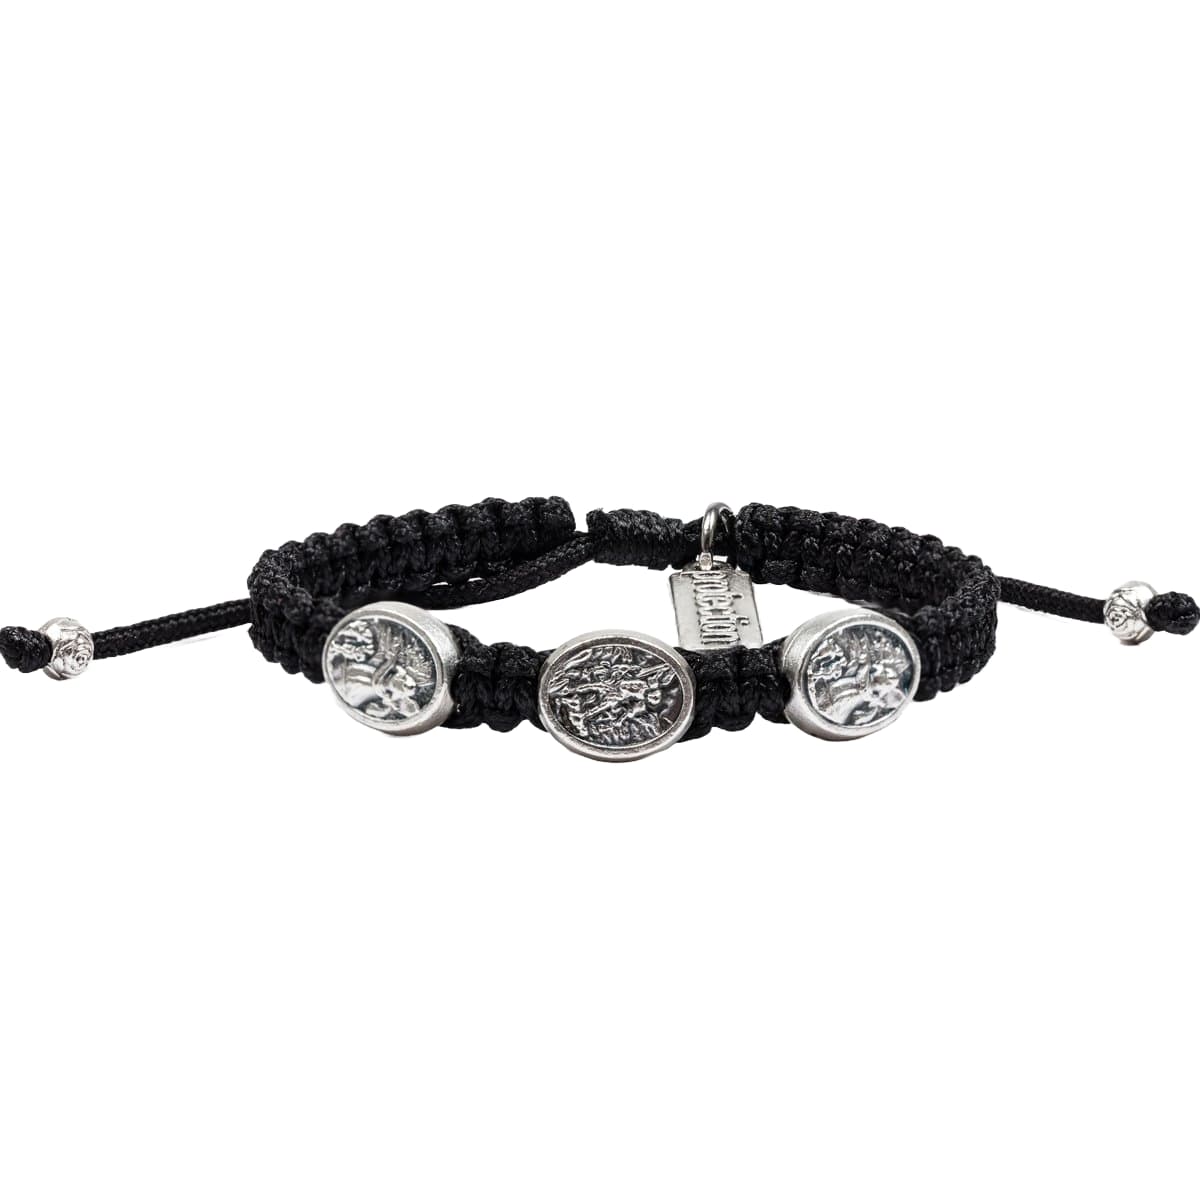 Buy Saint Michael Bracelet | Women Men Archangel Medal with Protection Gift  for Men and Women Silver Plated Bracelet Adjustable Religious Jewelry  Online at Lowest Price Ever in India | Check Reviews